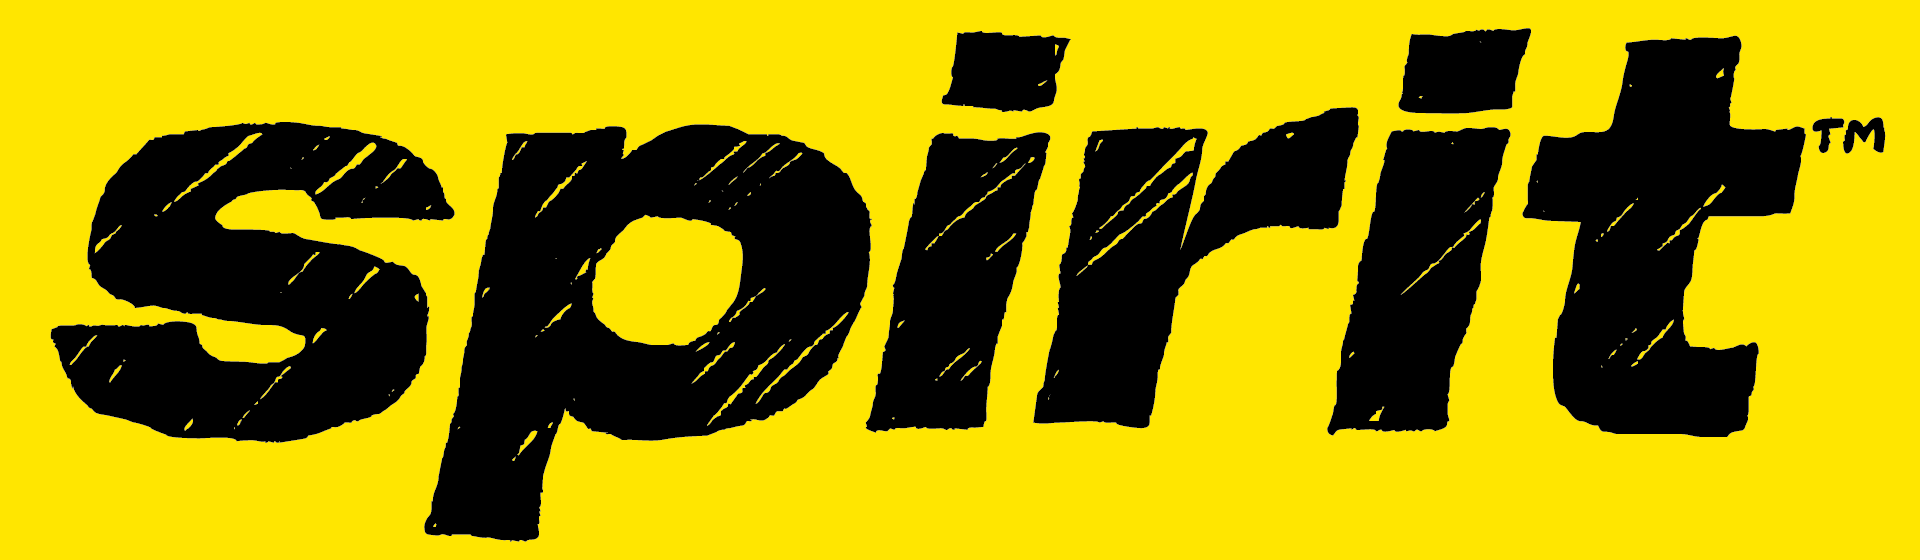 A black and yellow spirit logo on a yellow background, designed by an Indianapolis Marketing Agency.